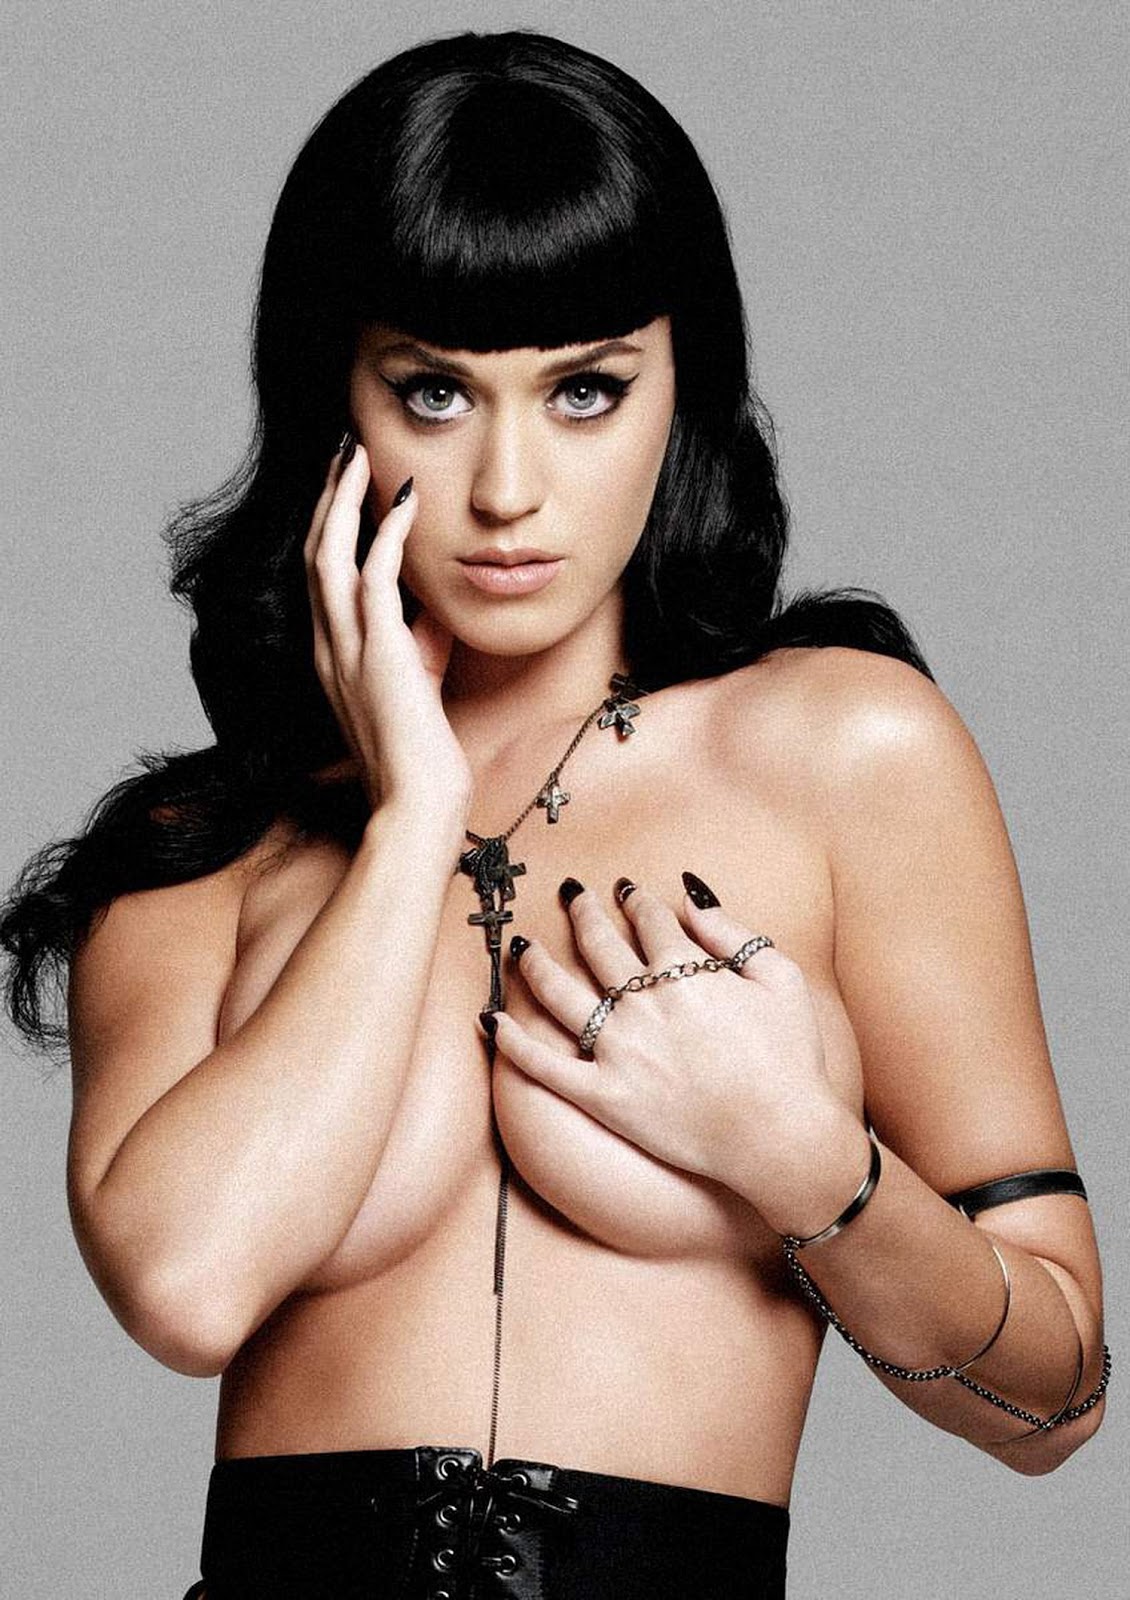 Katy Perry nude.